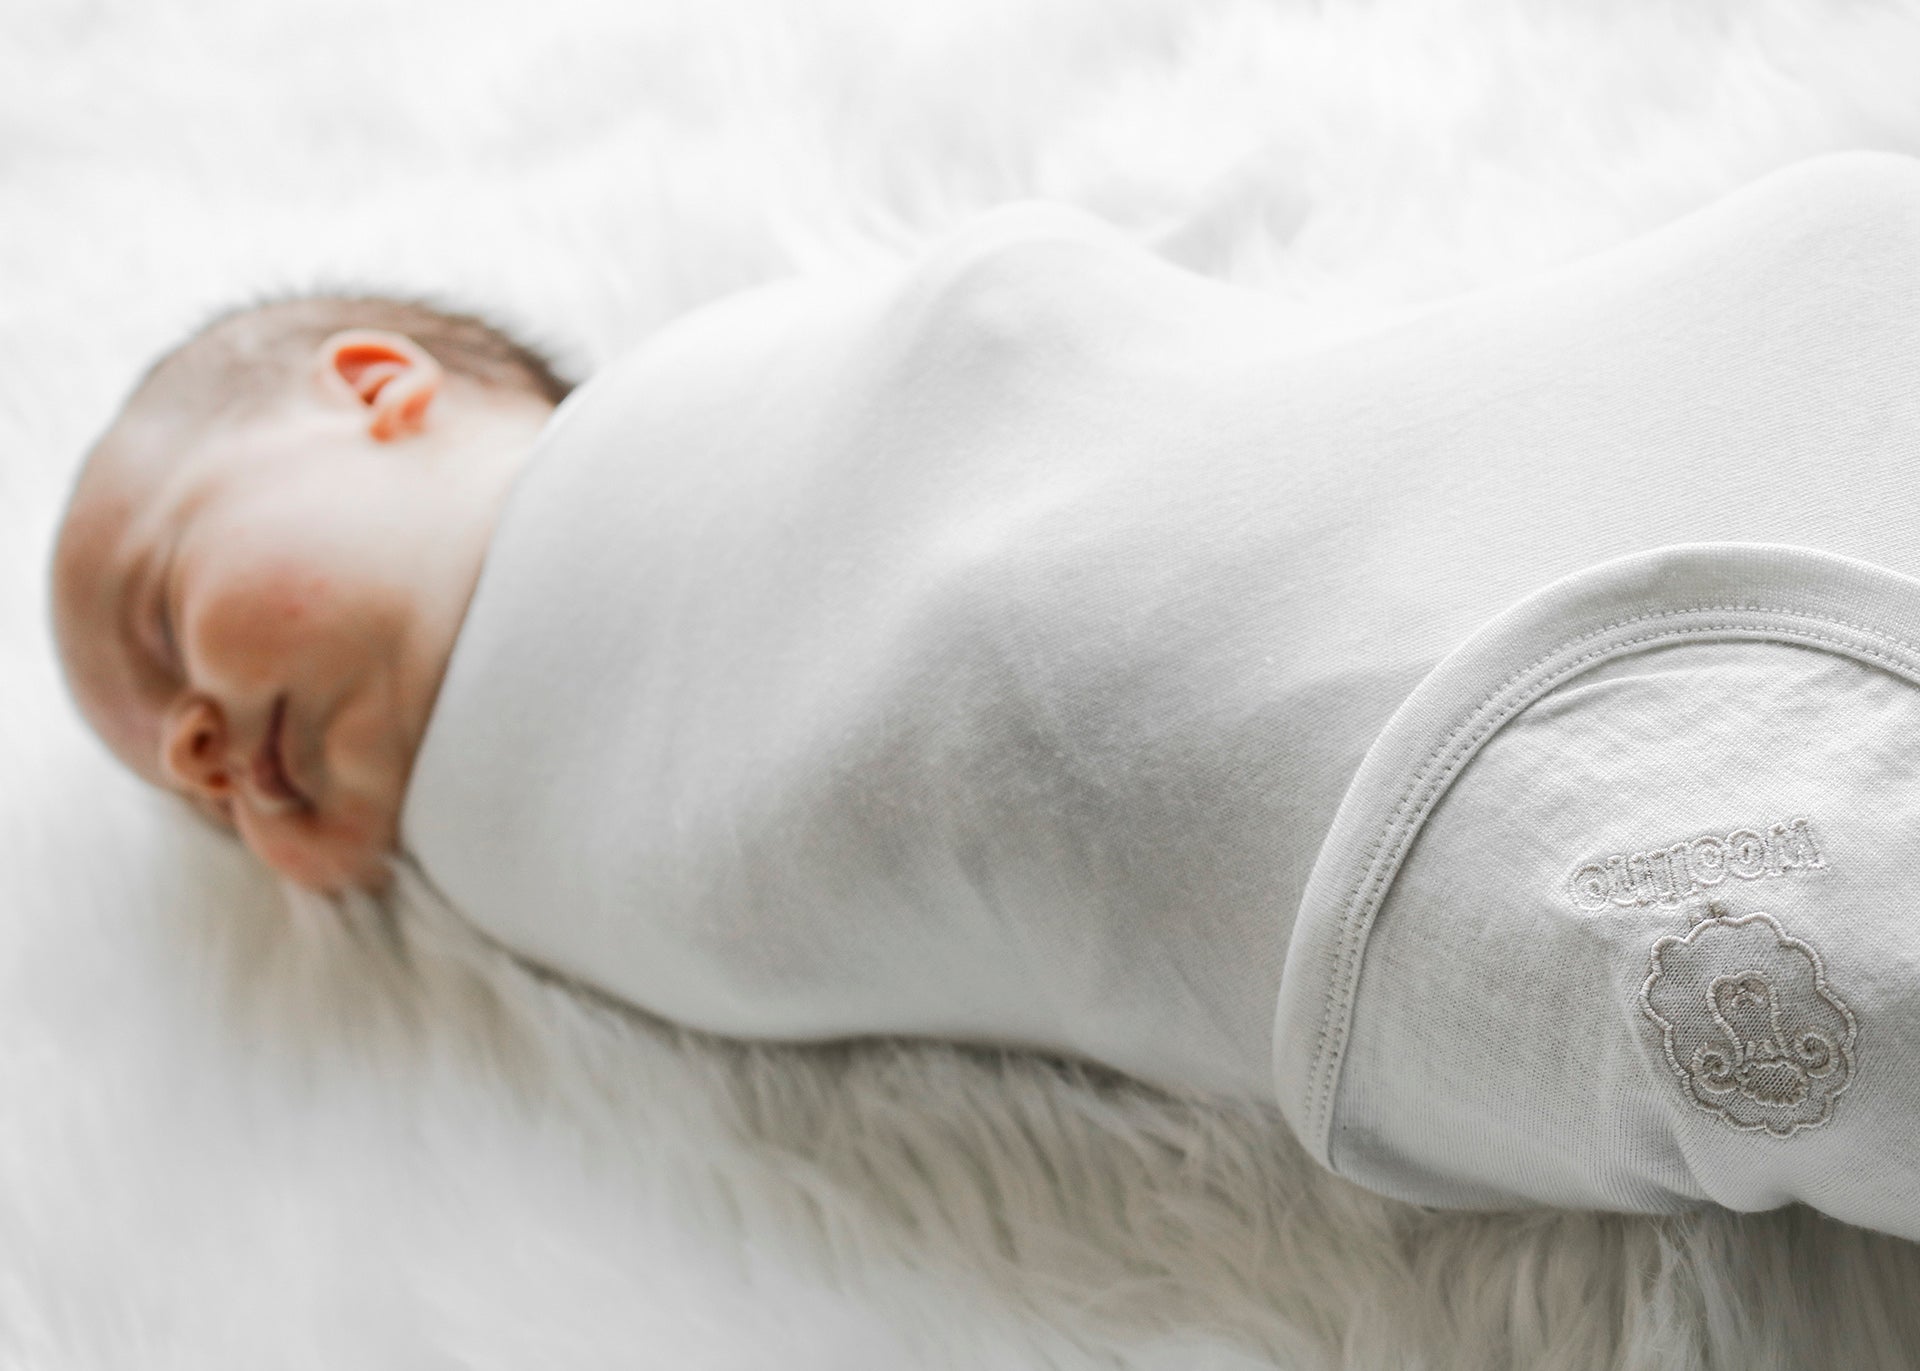 What to Do If Your Baby Falls Asleep While Nursing